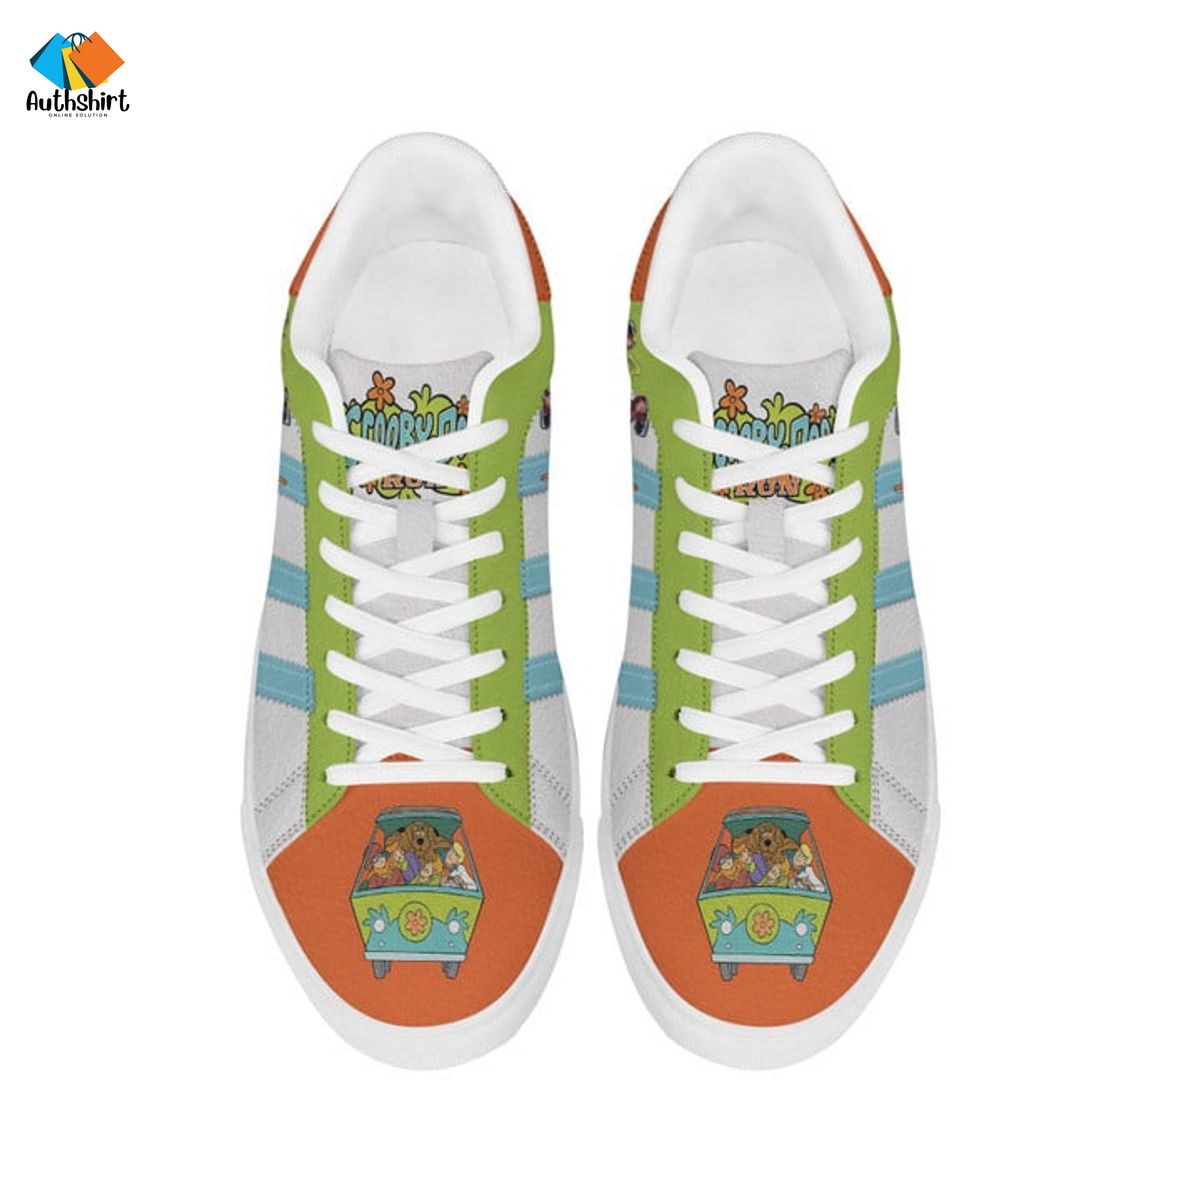 Scooby Doo Green Adidas Stan Smith Shoes